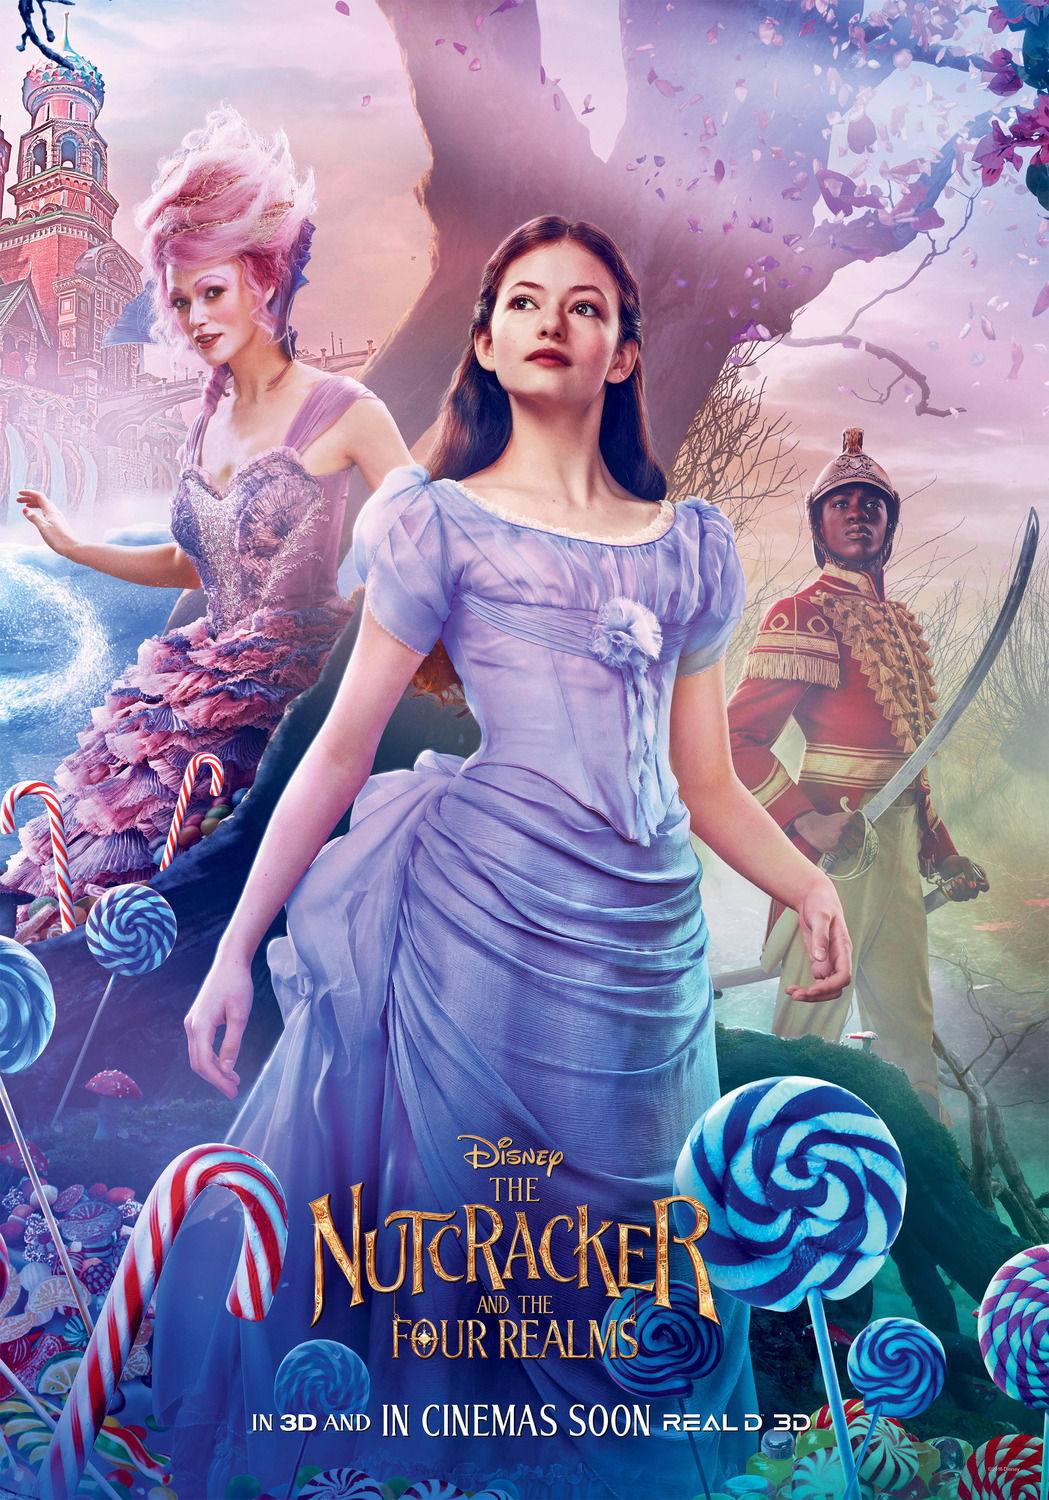 Extra Large Movie Poster Image for The Nutcracker and the Four Realms (#22 of 24)